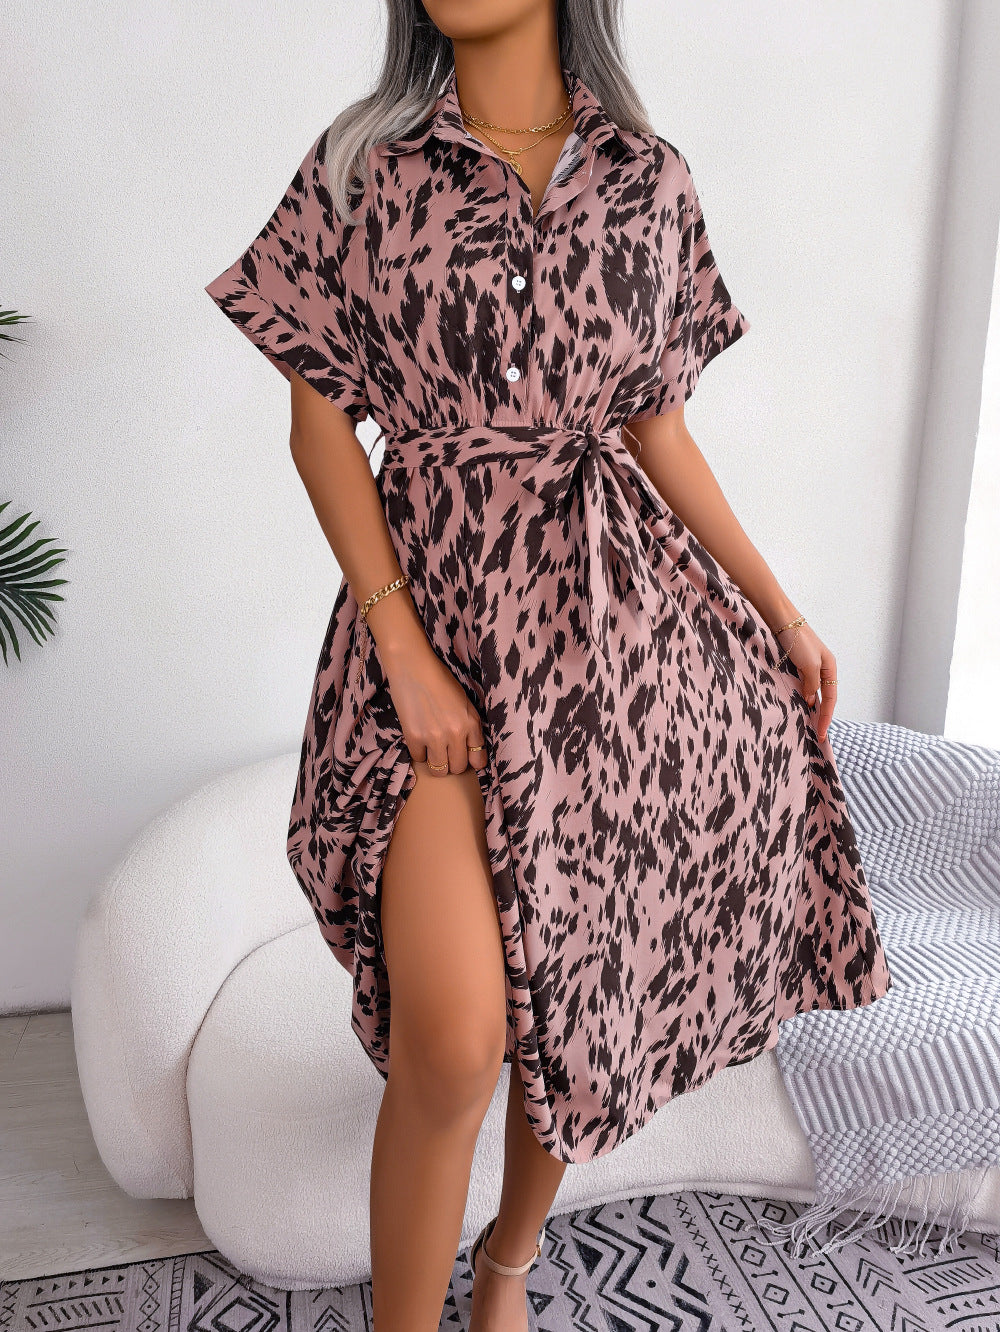 Summer Casual Loose Leopard Print Lace Up Dress Women Clothing